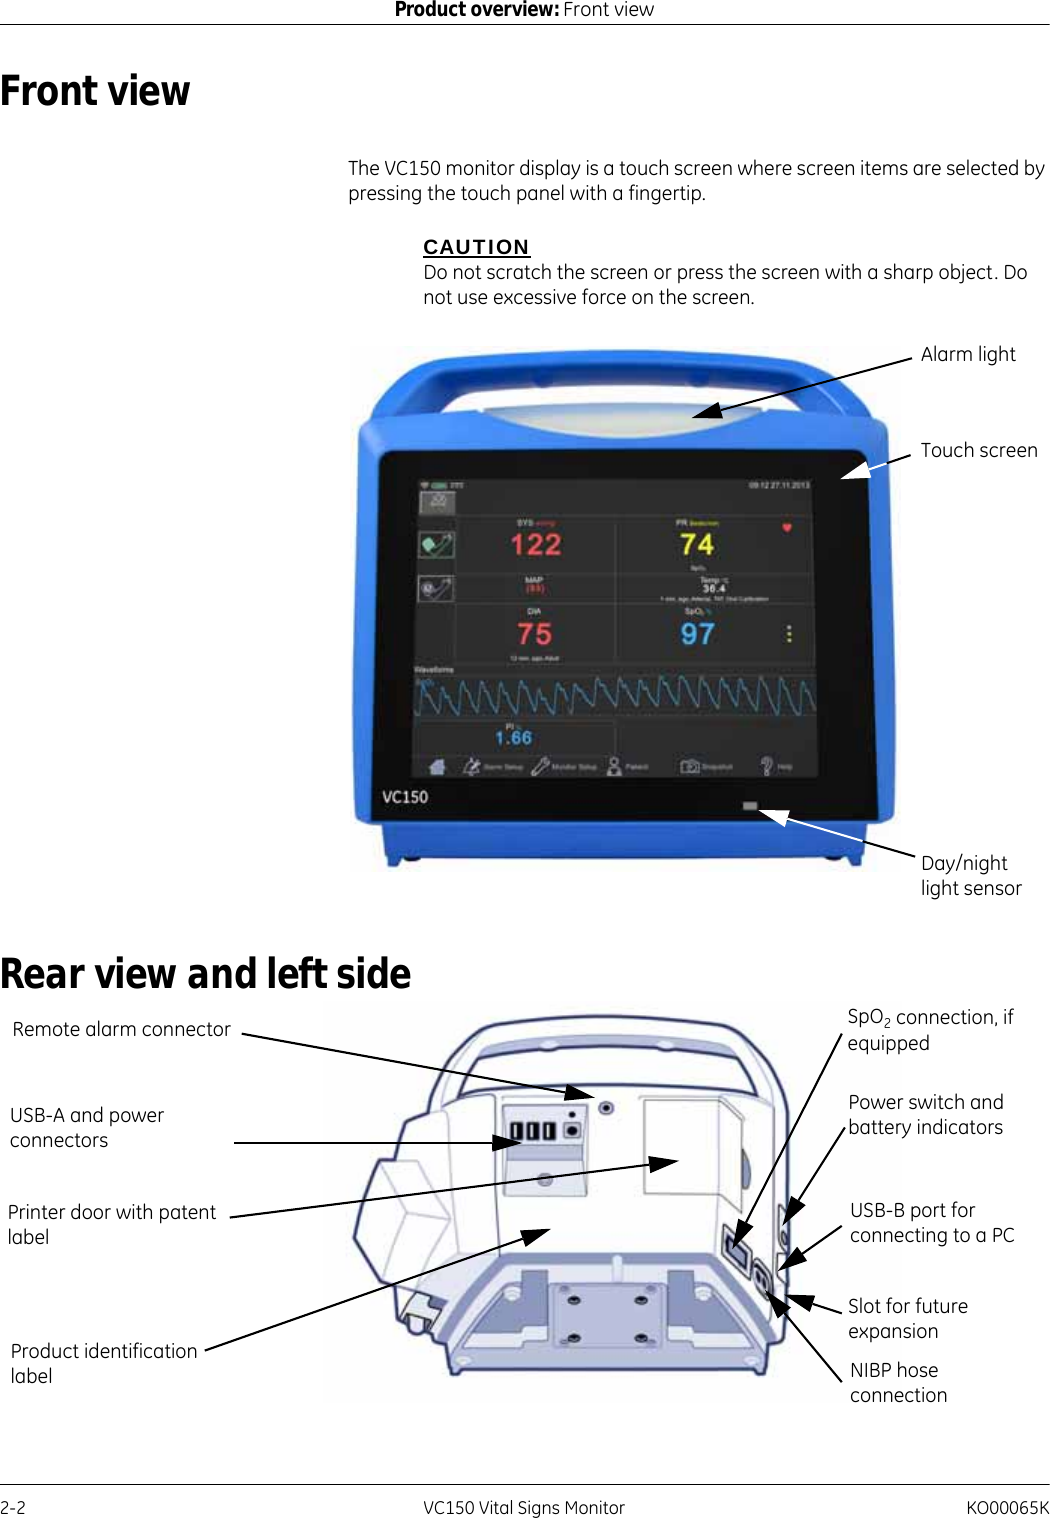 2-2 VC150 Vital Signs Monitor KO00065KProduct overview: Front viewFront viewThe VC150 monitor display is a touch screen where screen items are selected by pressing the touch panel with a fingertip.CAUTIONDo not scratch the screen or press the screen with a sharp object. Do not use excessive force on the screen.Rear view and left sideAlarm lightTouch screenDay/night light sensorUSB-A and power connectorsRemote alarm connectorUSB-B port for connecting to a PCSlot for future expansionPrinter door with patent labelPower switch and battery indicatorsNIBP hoseconnectionSpO2 connection, if equippedProduct identification label